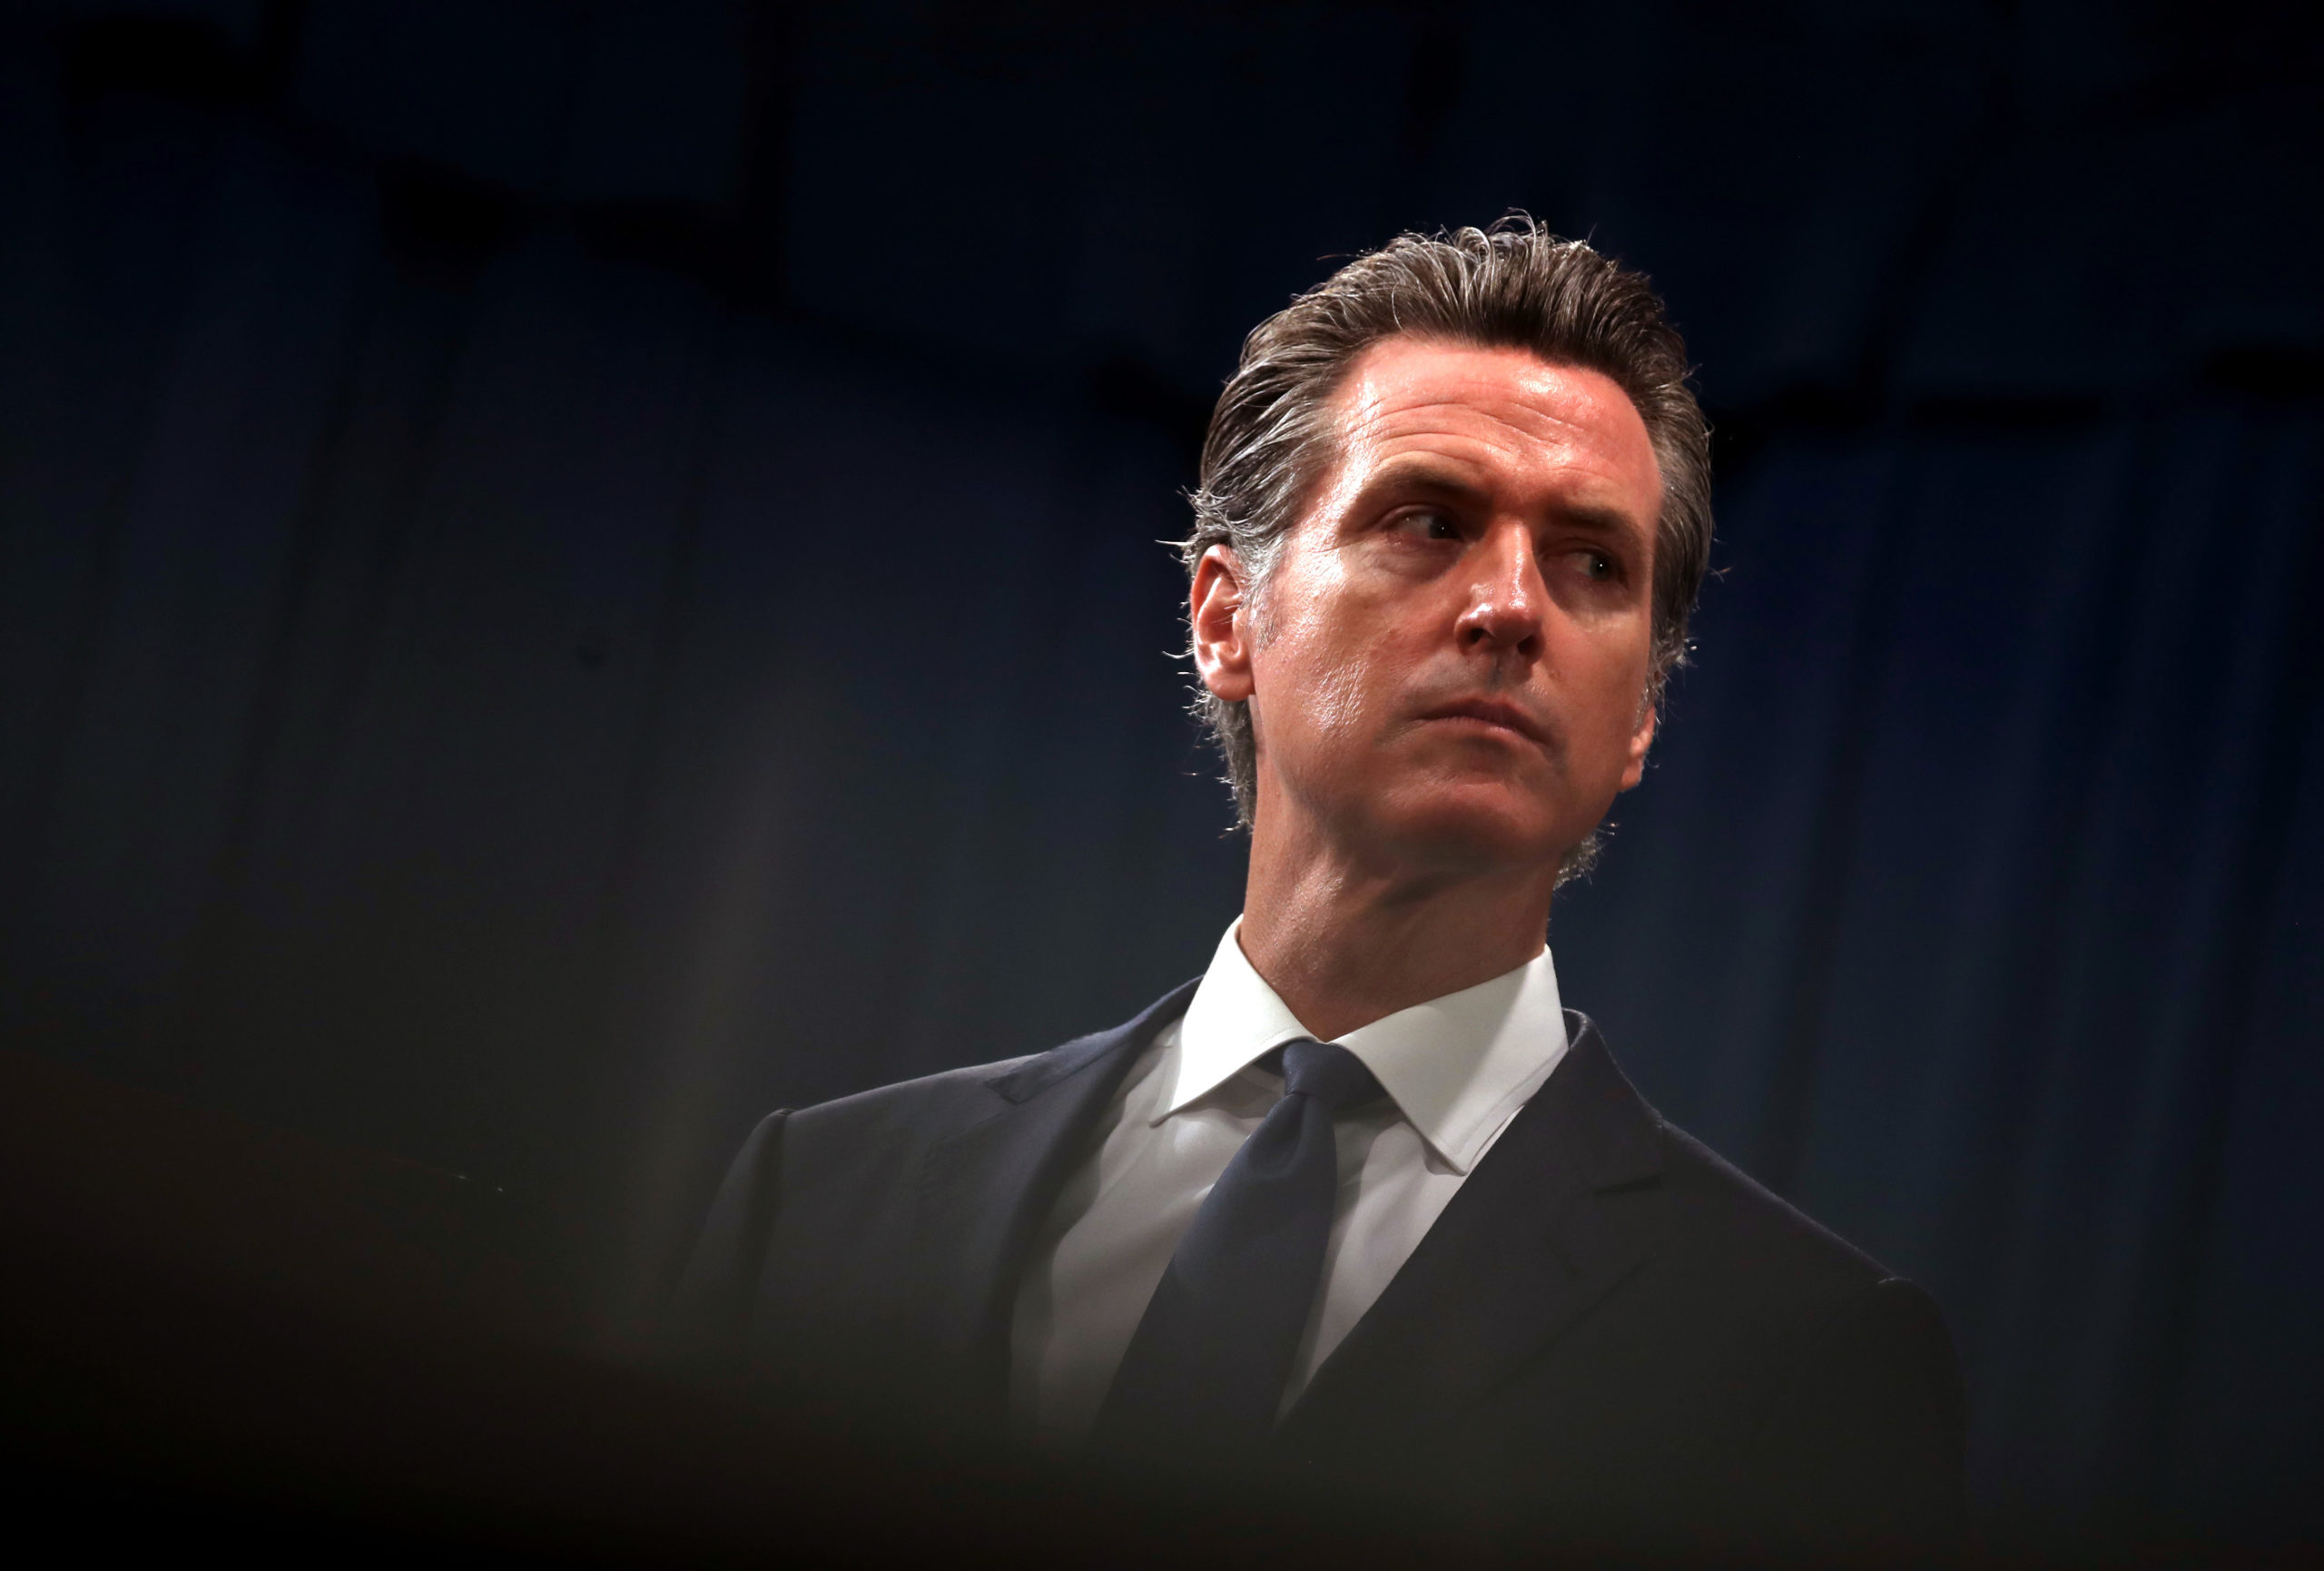 SACRAMENTO, CALIFORNIA - AUGUST 16: California Gov. Gavin Newsom looks on during a news conference with California attorney General Xavier Becerra at the California State Capitol on August 16, 2019 in Sacramento, California. California attorney genera Xavier Becerra and California Gov. Gavin Newsom announced that the State of California is suing the Trump administration challenging the legality of a new "public charge" rule that would make it difficult for immigrants to obtain green cards who receive public assistance like food stamps and Medicaid. (Photo by Justin Sullivan/Getty Images)